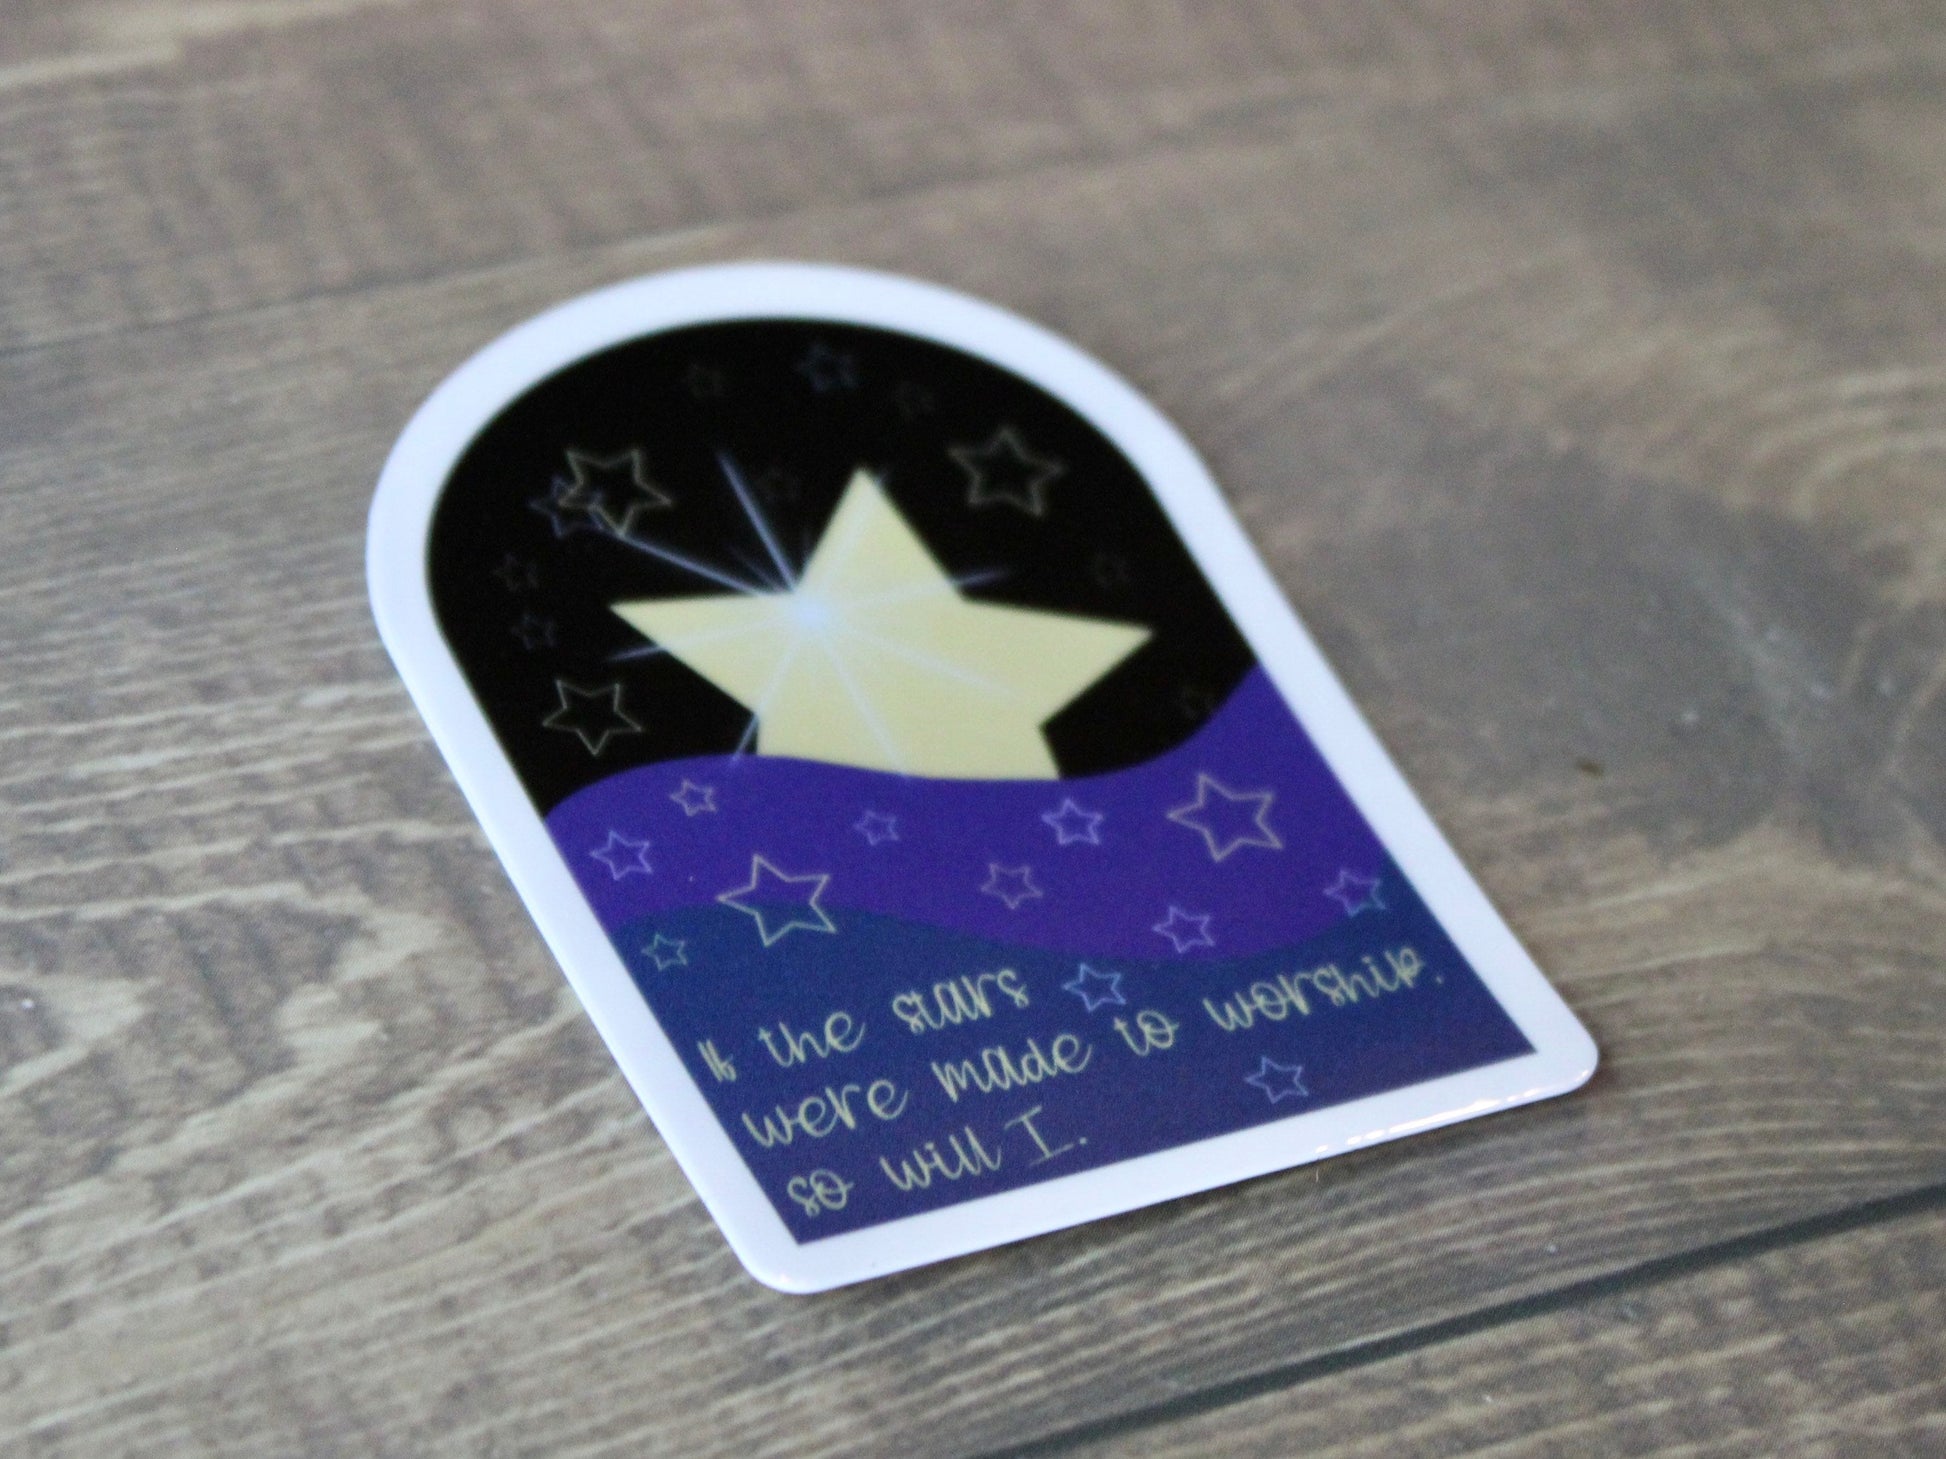 If the stars were made to worship, so will I - Christian Faith UV/ Waterproof Vinyl Sticker/ Decal- Choice of Size, Single or Bulk qty